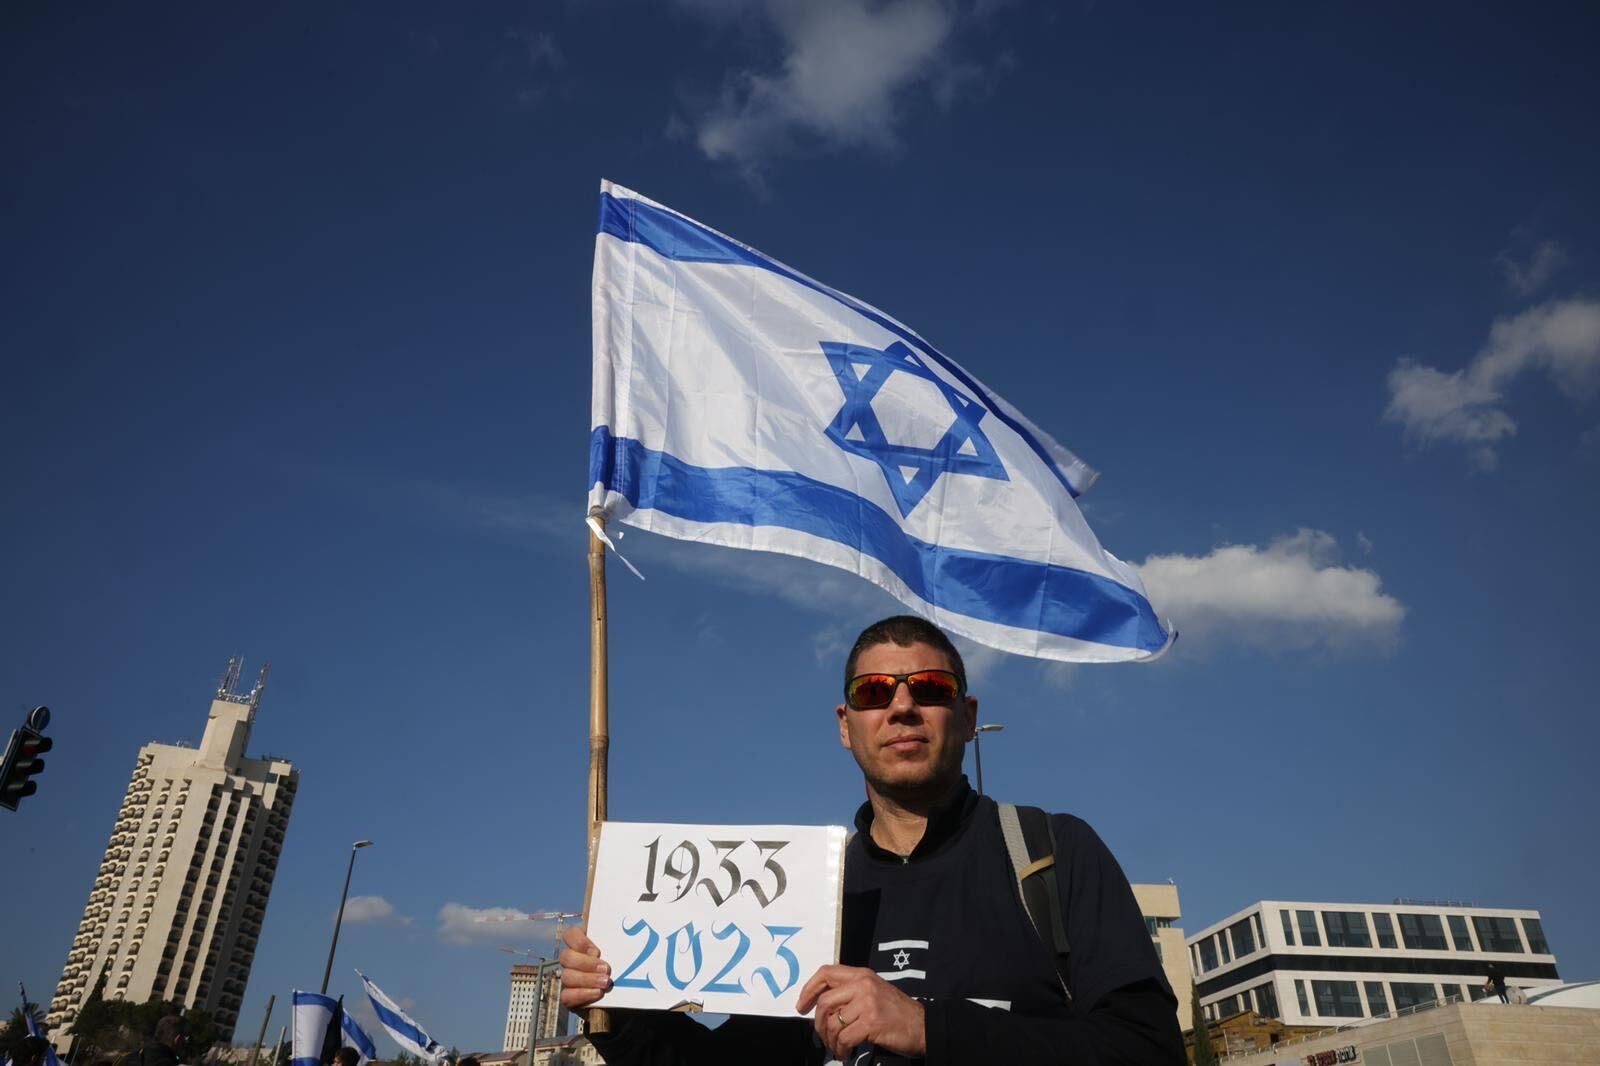 An Israeli protester holds up a sign comparing the rise of authoritarianism in Germany to that in Israel, on 13 February, 2023 (MEE)